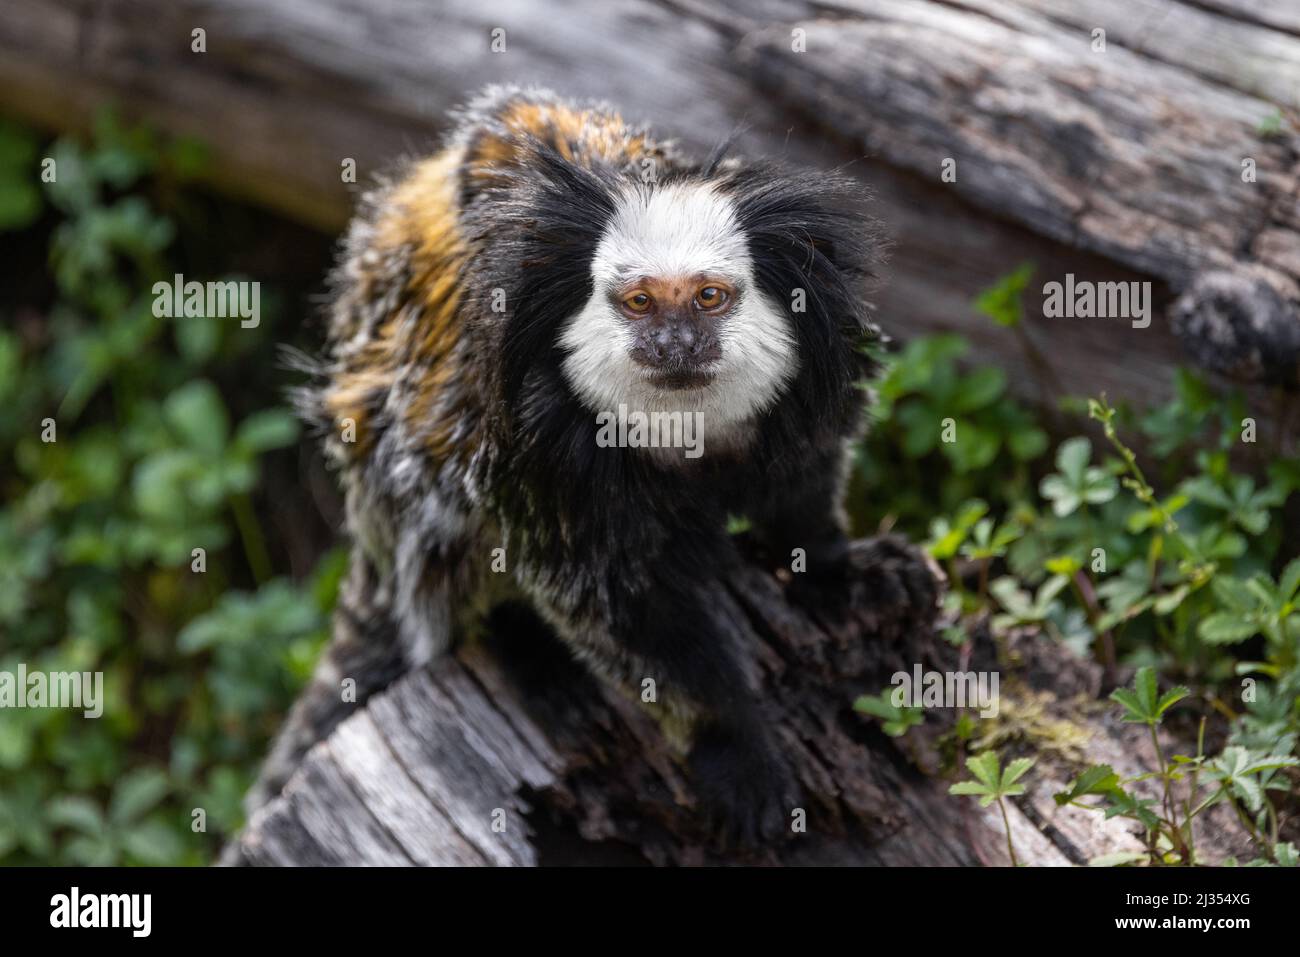 A white-headed marmoset sitting on a fallen tree trunk and looking up into the camera Stock Photo